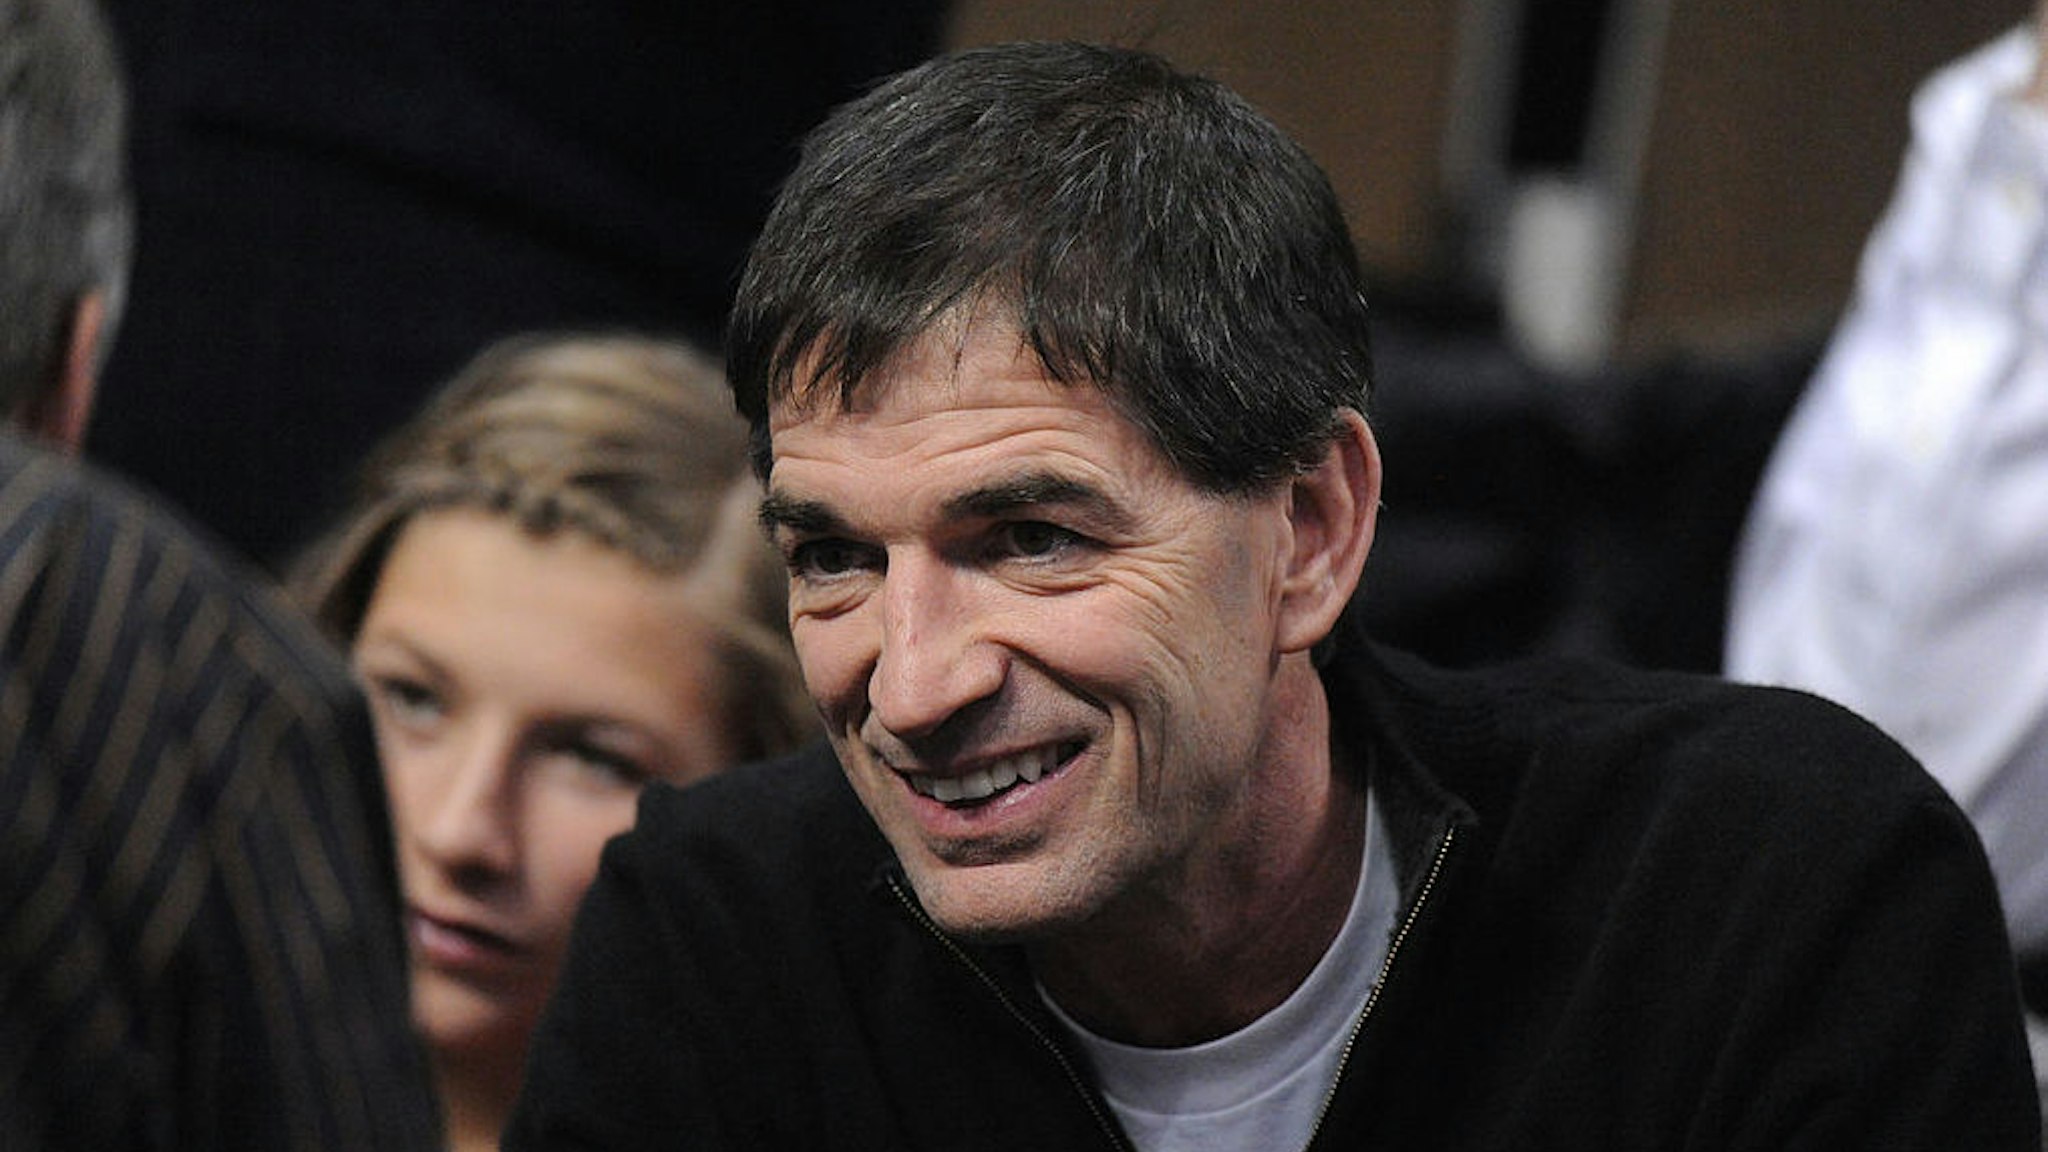 John Stockton talks to other fans in the crowd before the BYU and Gonzaga game in the Third Round of the NCAA Tournament on March 19, 2011 at the Pepsi Center in Denver, Colorado. Stockton's son, David, is a freshman on the Gonzaga team. (Hyoung Chang, The Denver Post)